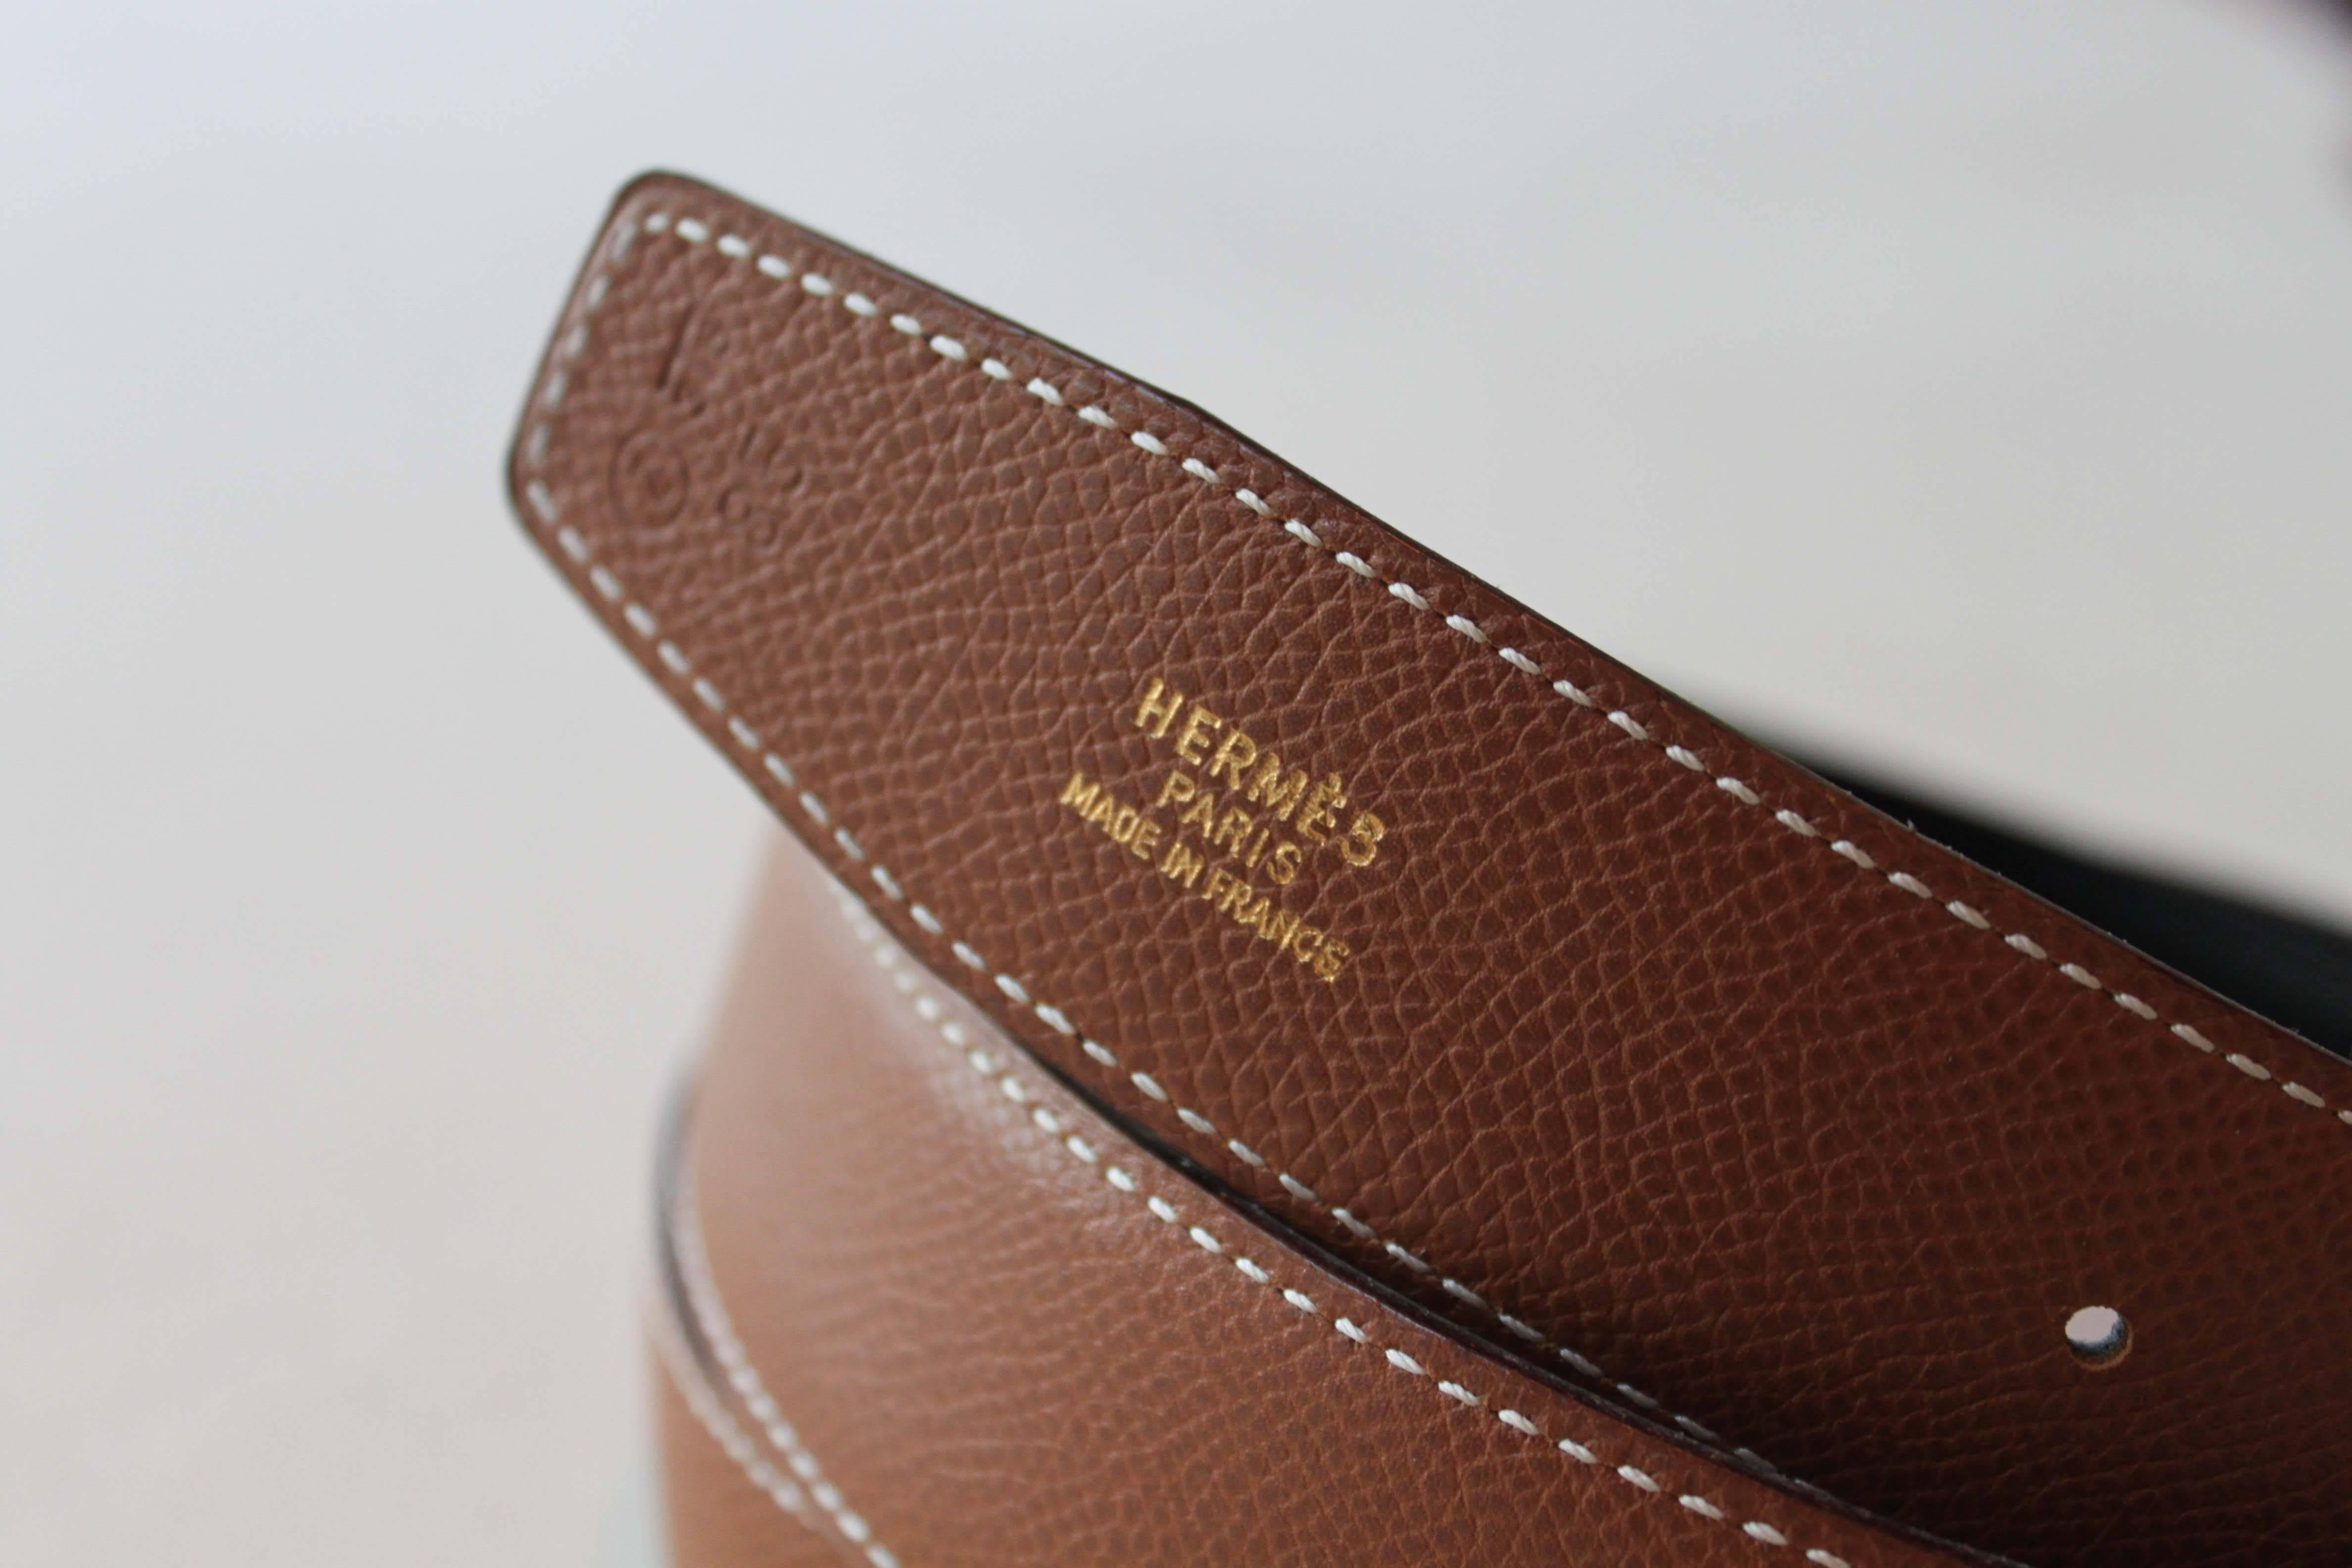 Vintage Hermès leather belt, reversible black and textured brown calfskin leather. Note the slight wear on notches, otherwise in very good condition. Does not include buckle. Size 85, date-stamped 1996.